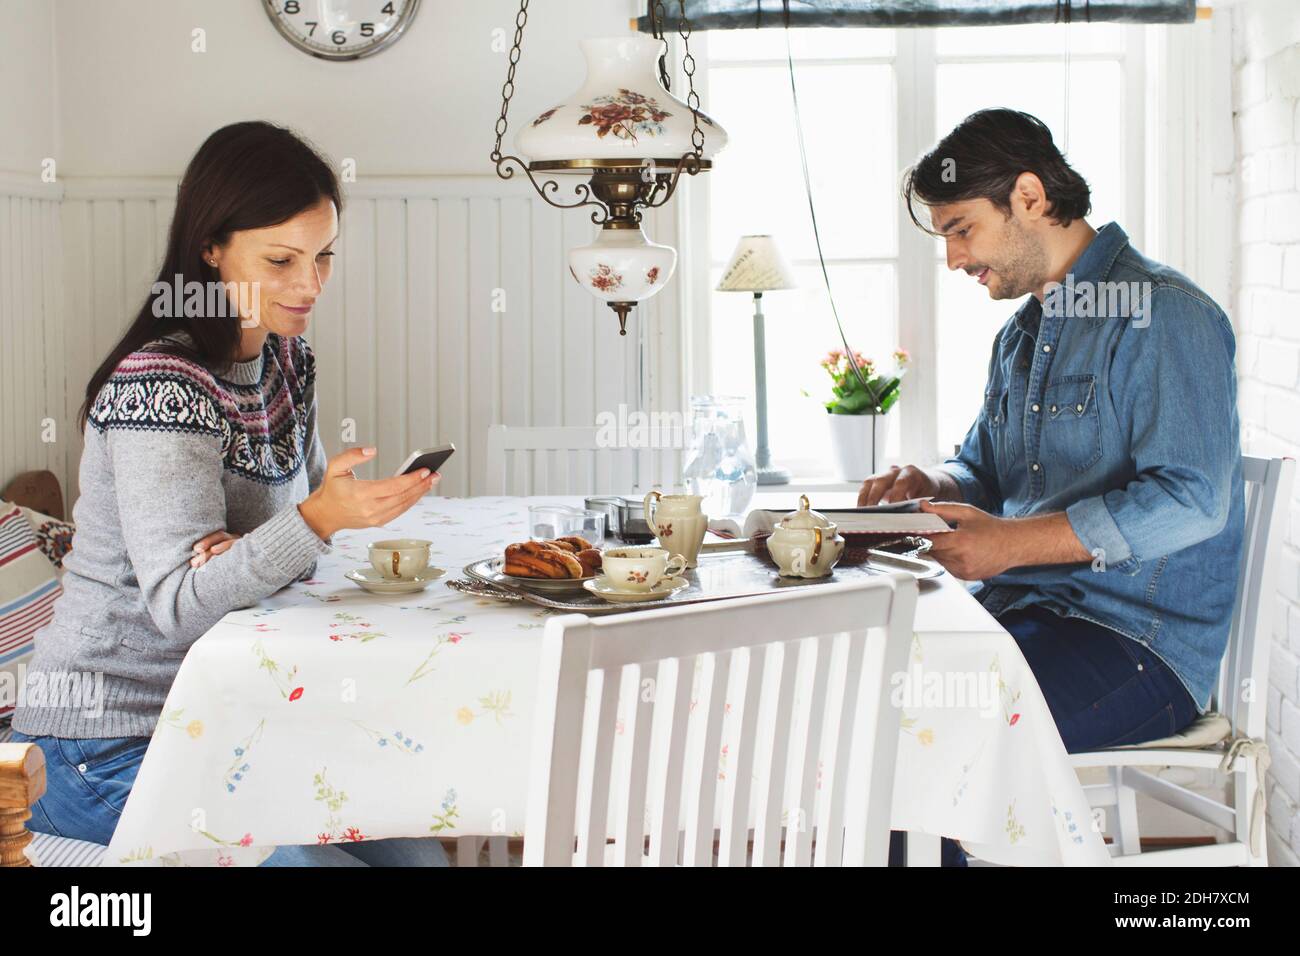 Side view of mid adult couple spending leisure time at breakfast table Stock Photo